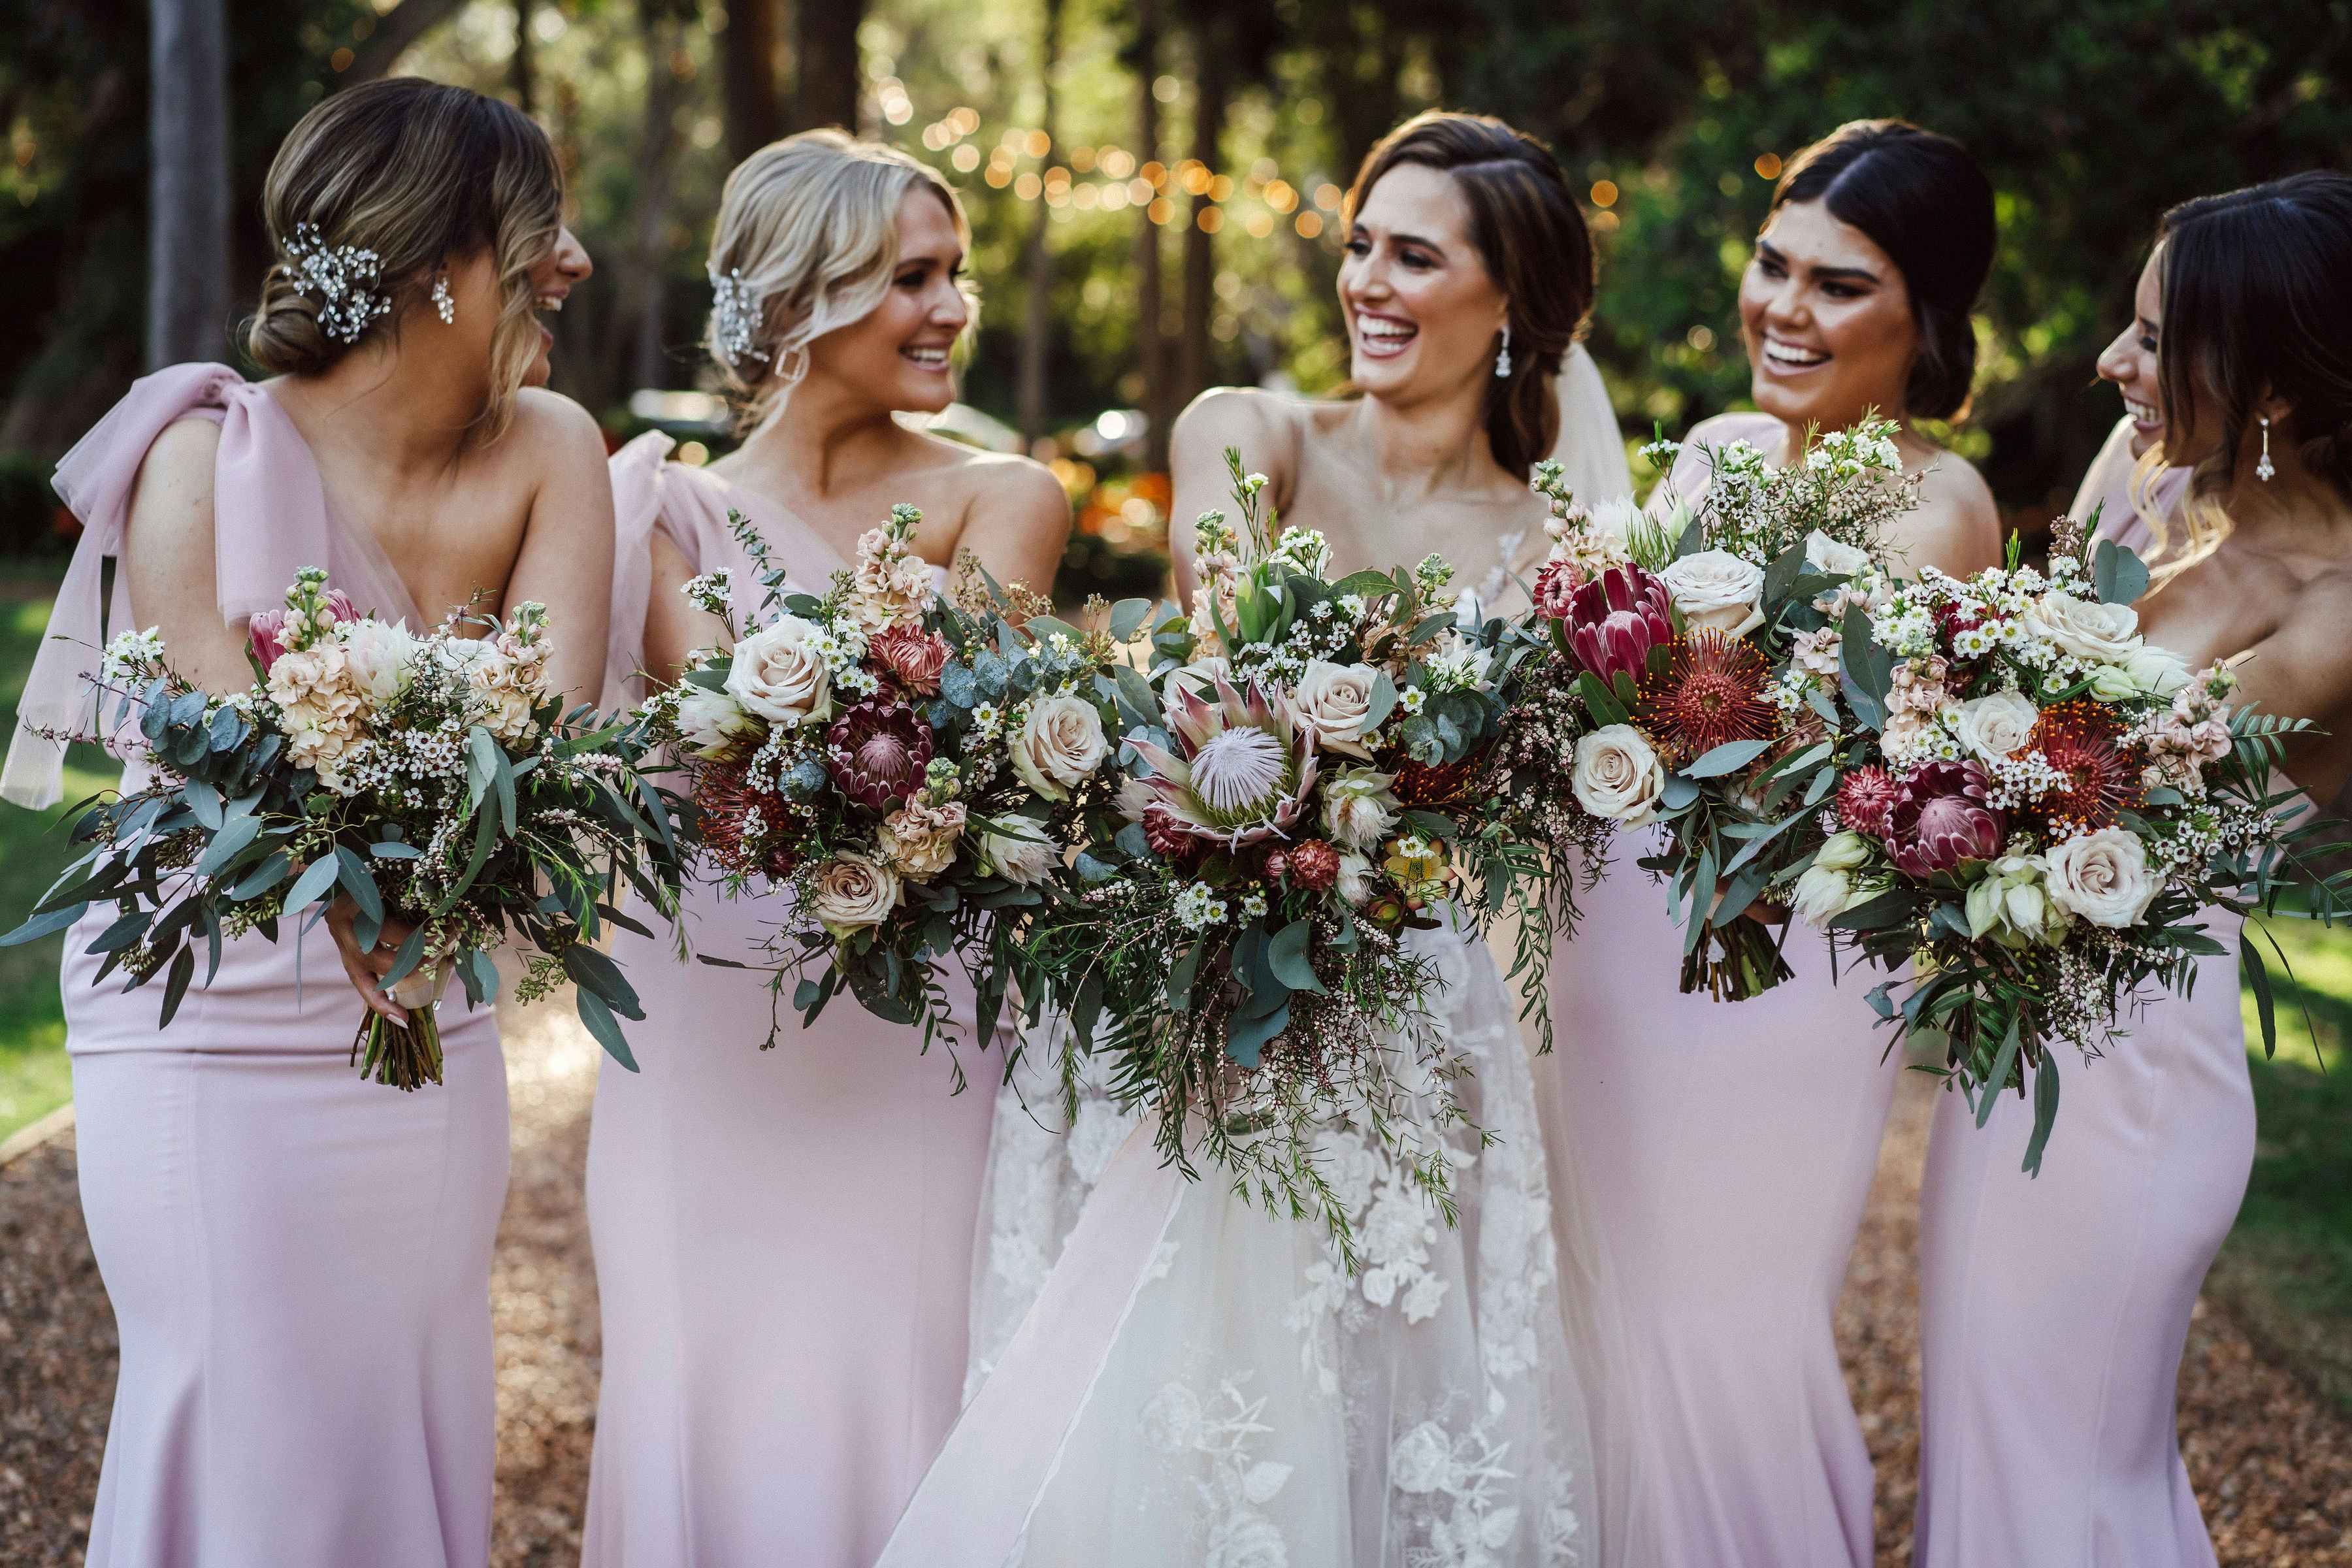 Bride and bridesmaids standing on driveway holding bouquets laughing